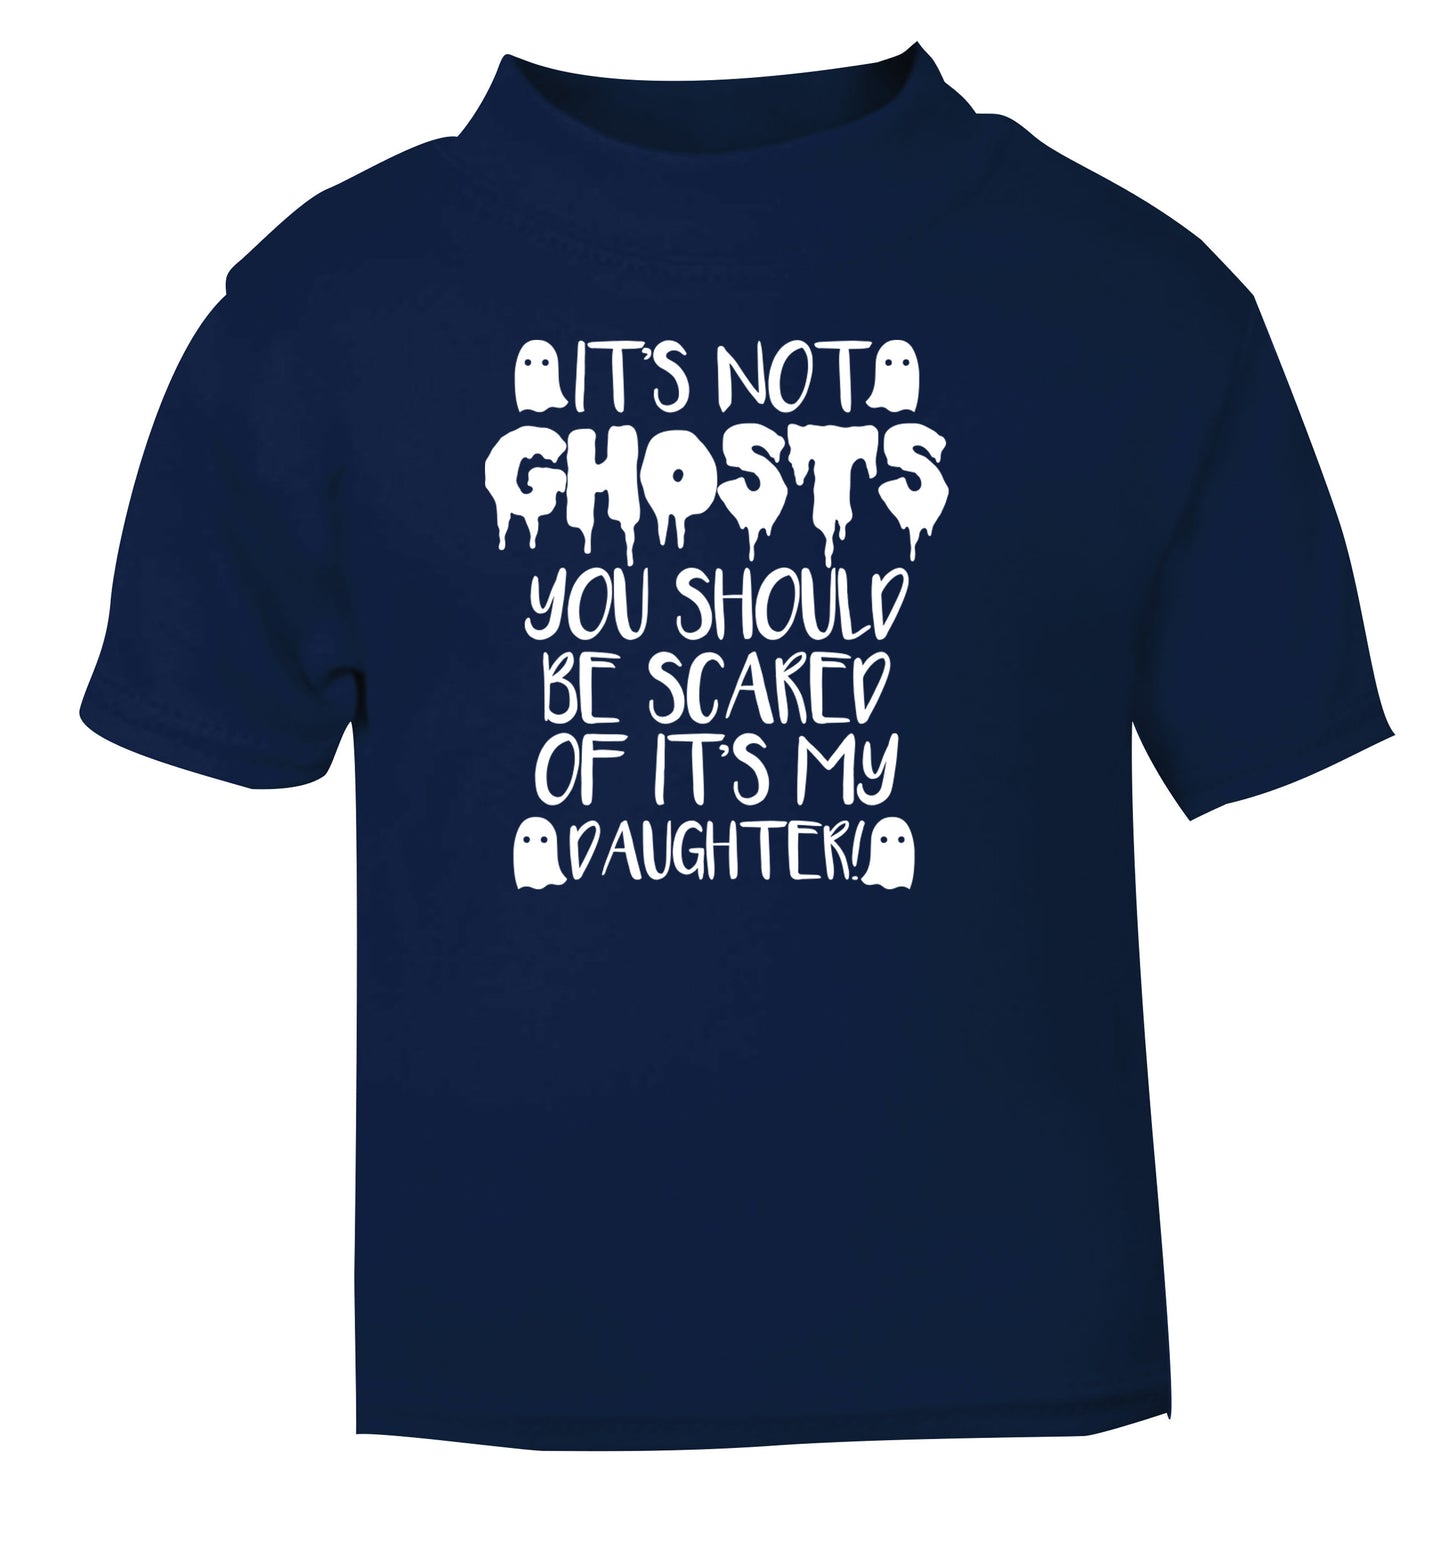 It's not ghosts you should be scared of it's my daughter! navy Baby Toddler Tshirt 2 Years